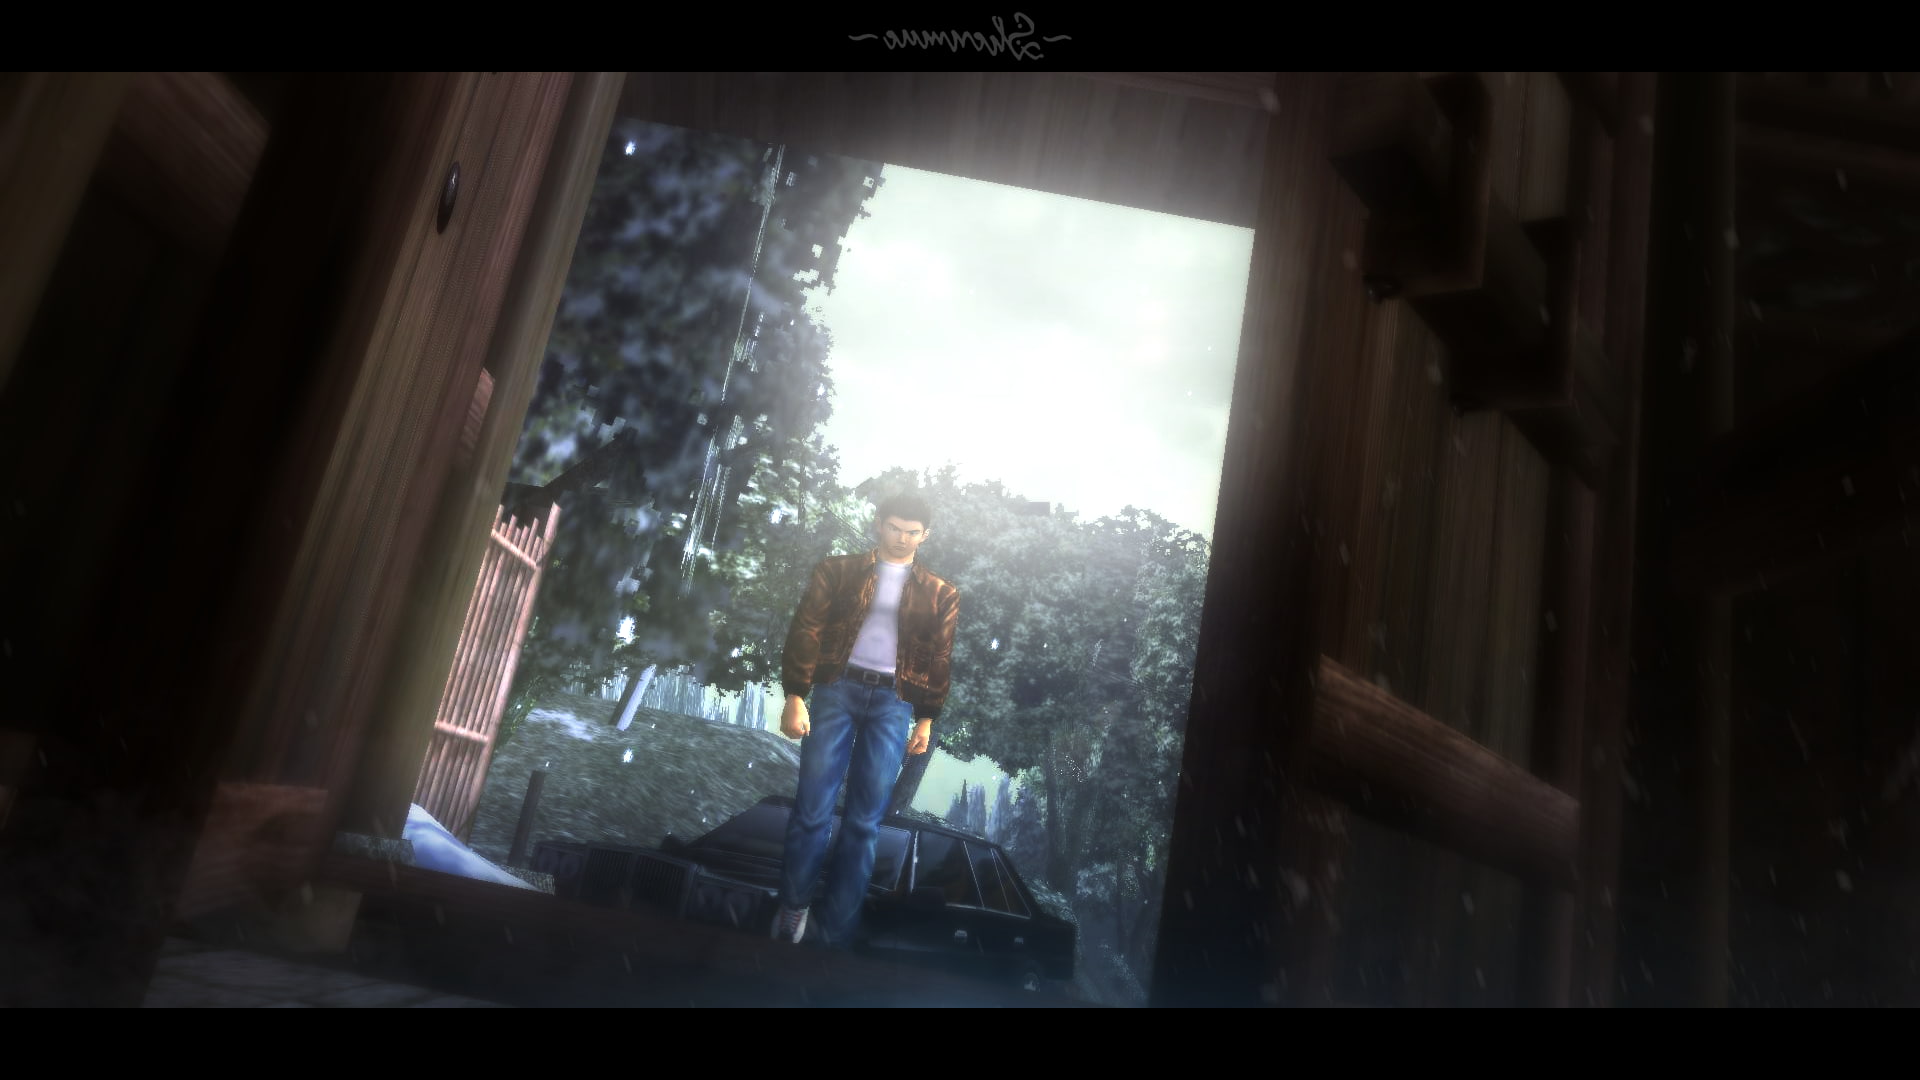 Sega, shenmue, video games, window, one person, indoors, day